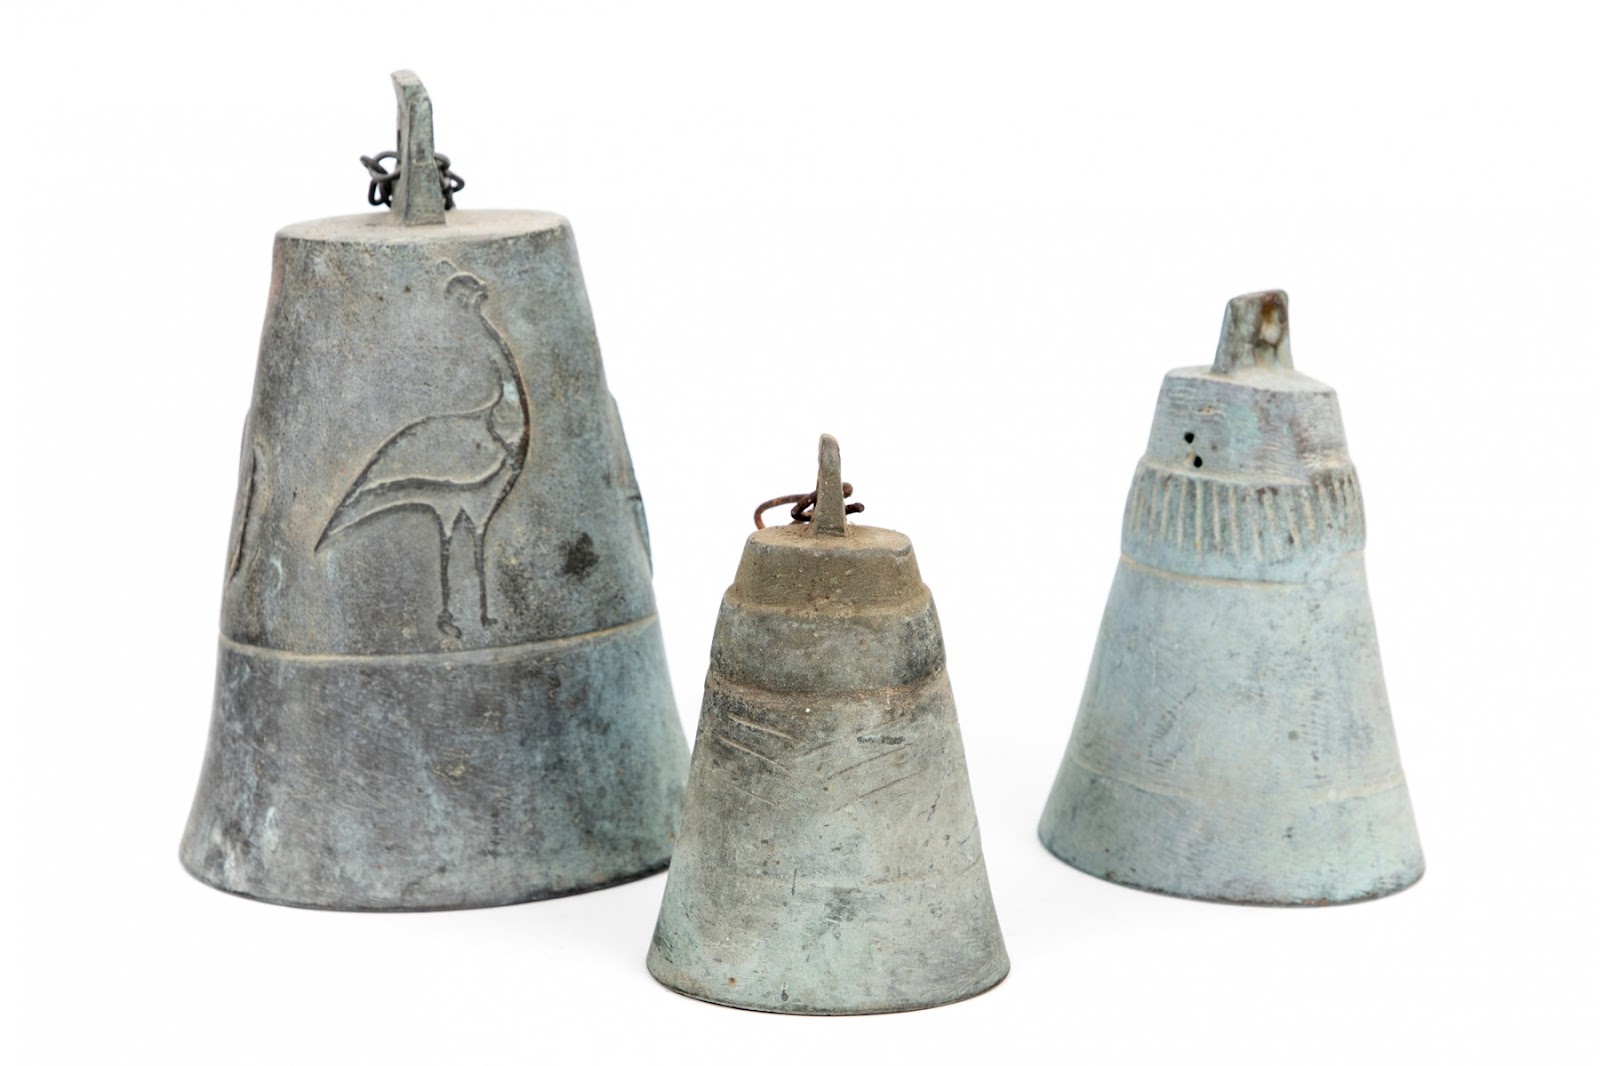 Group of Three Bells in the Style of Pual Solari